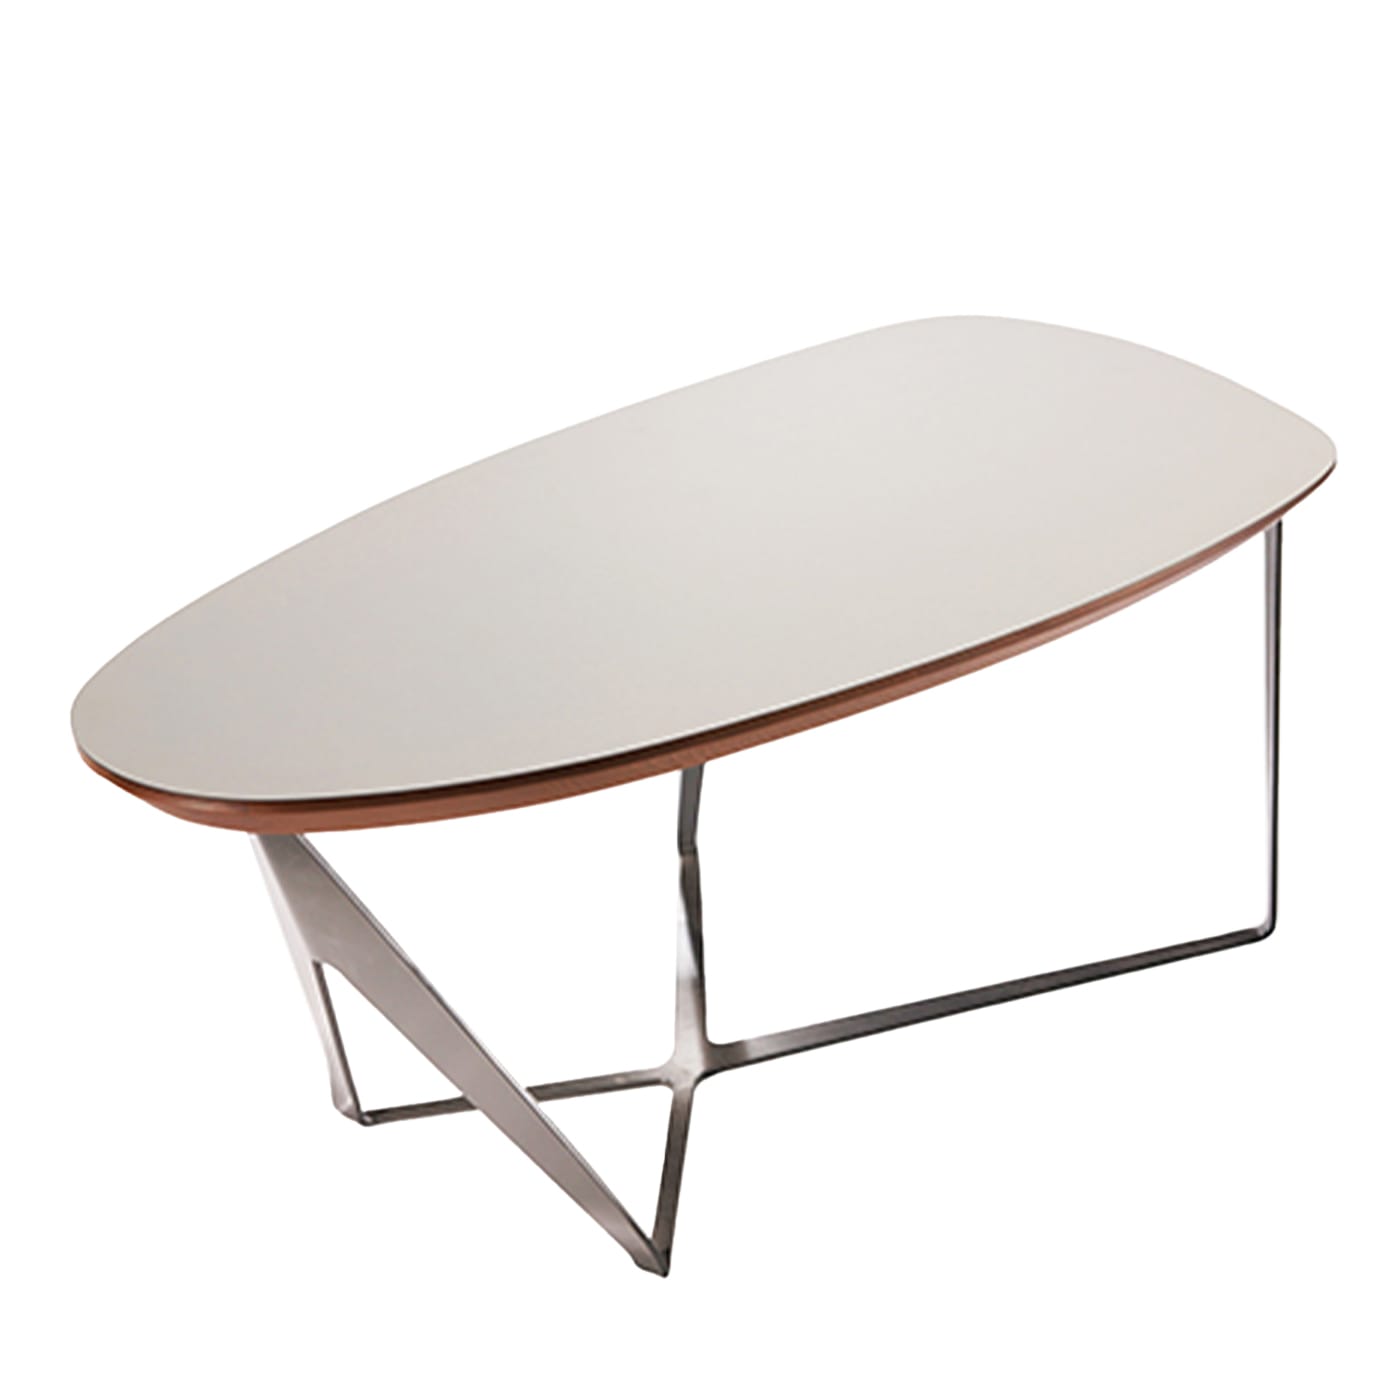 Ted One Tee White Coffee Table - Greyge